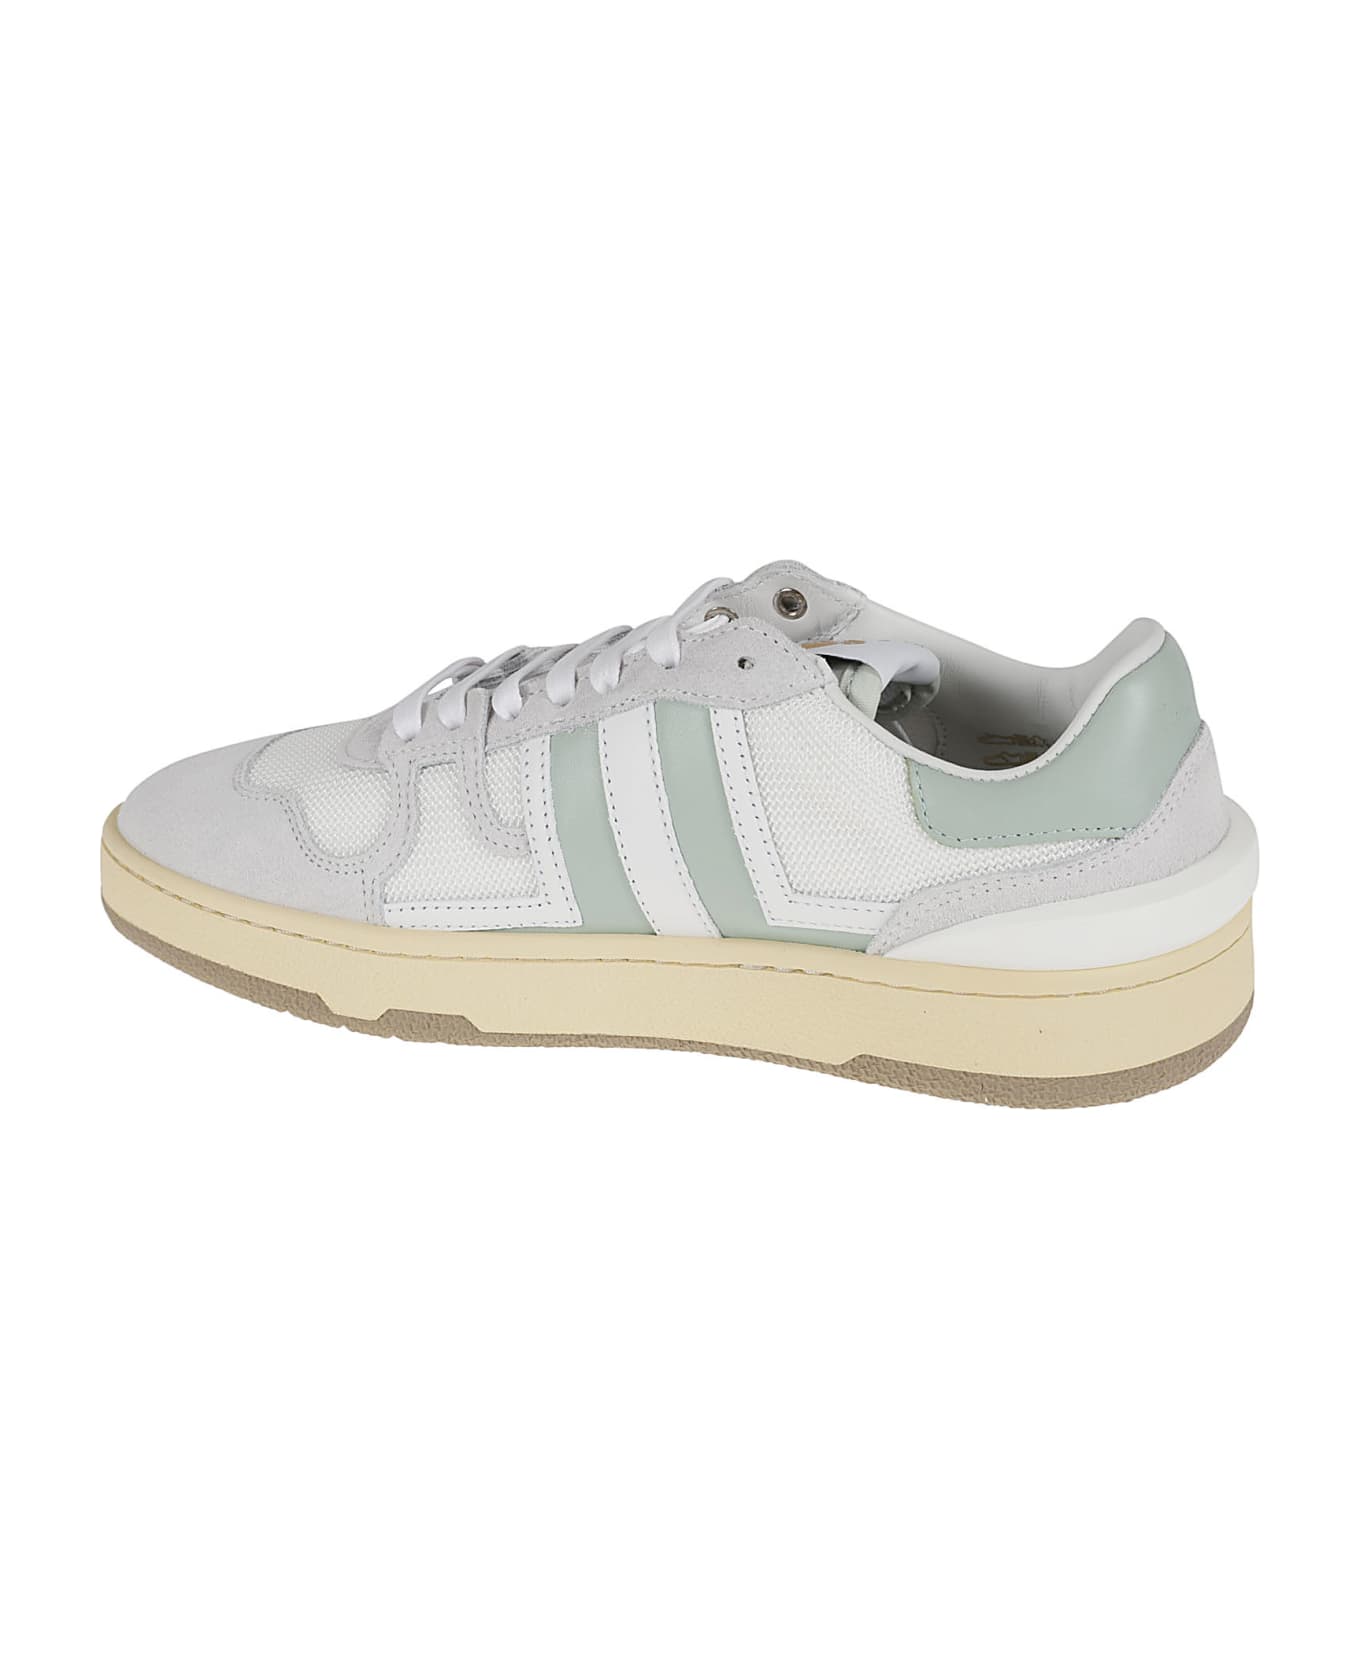 Lanvin Clay Low Top Sneakers - White/Sauge スニーカー